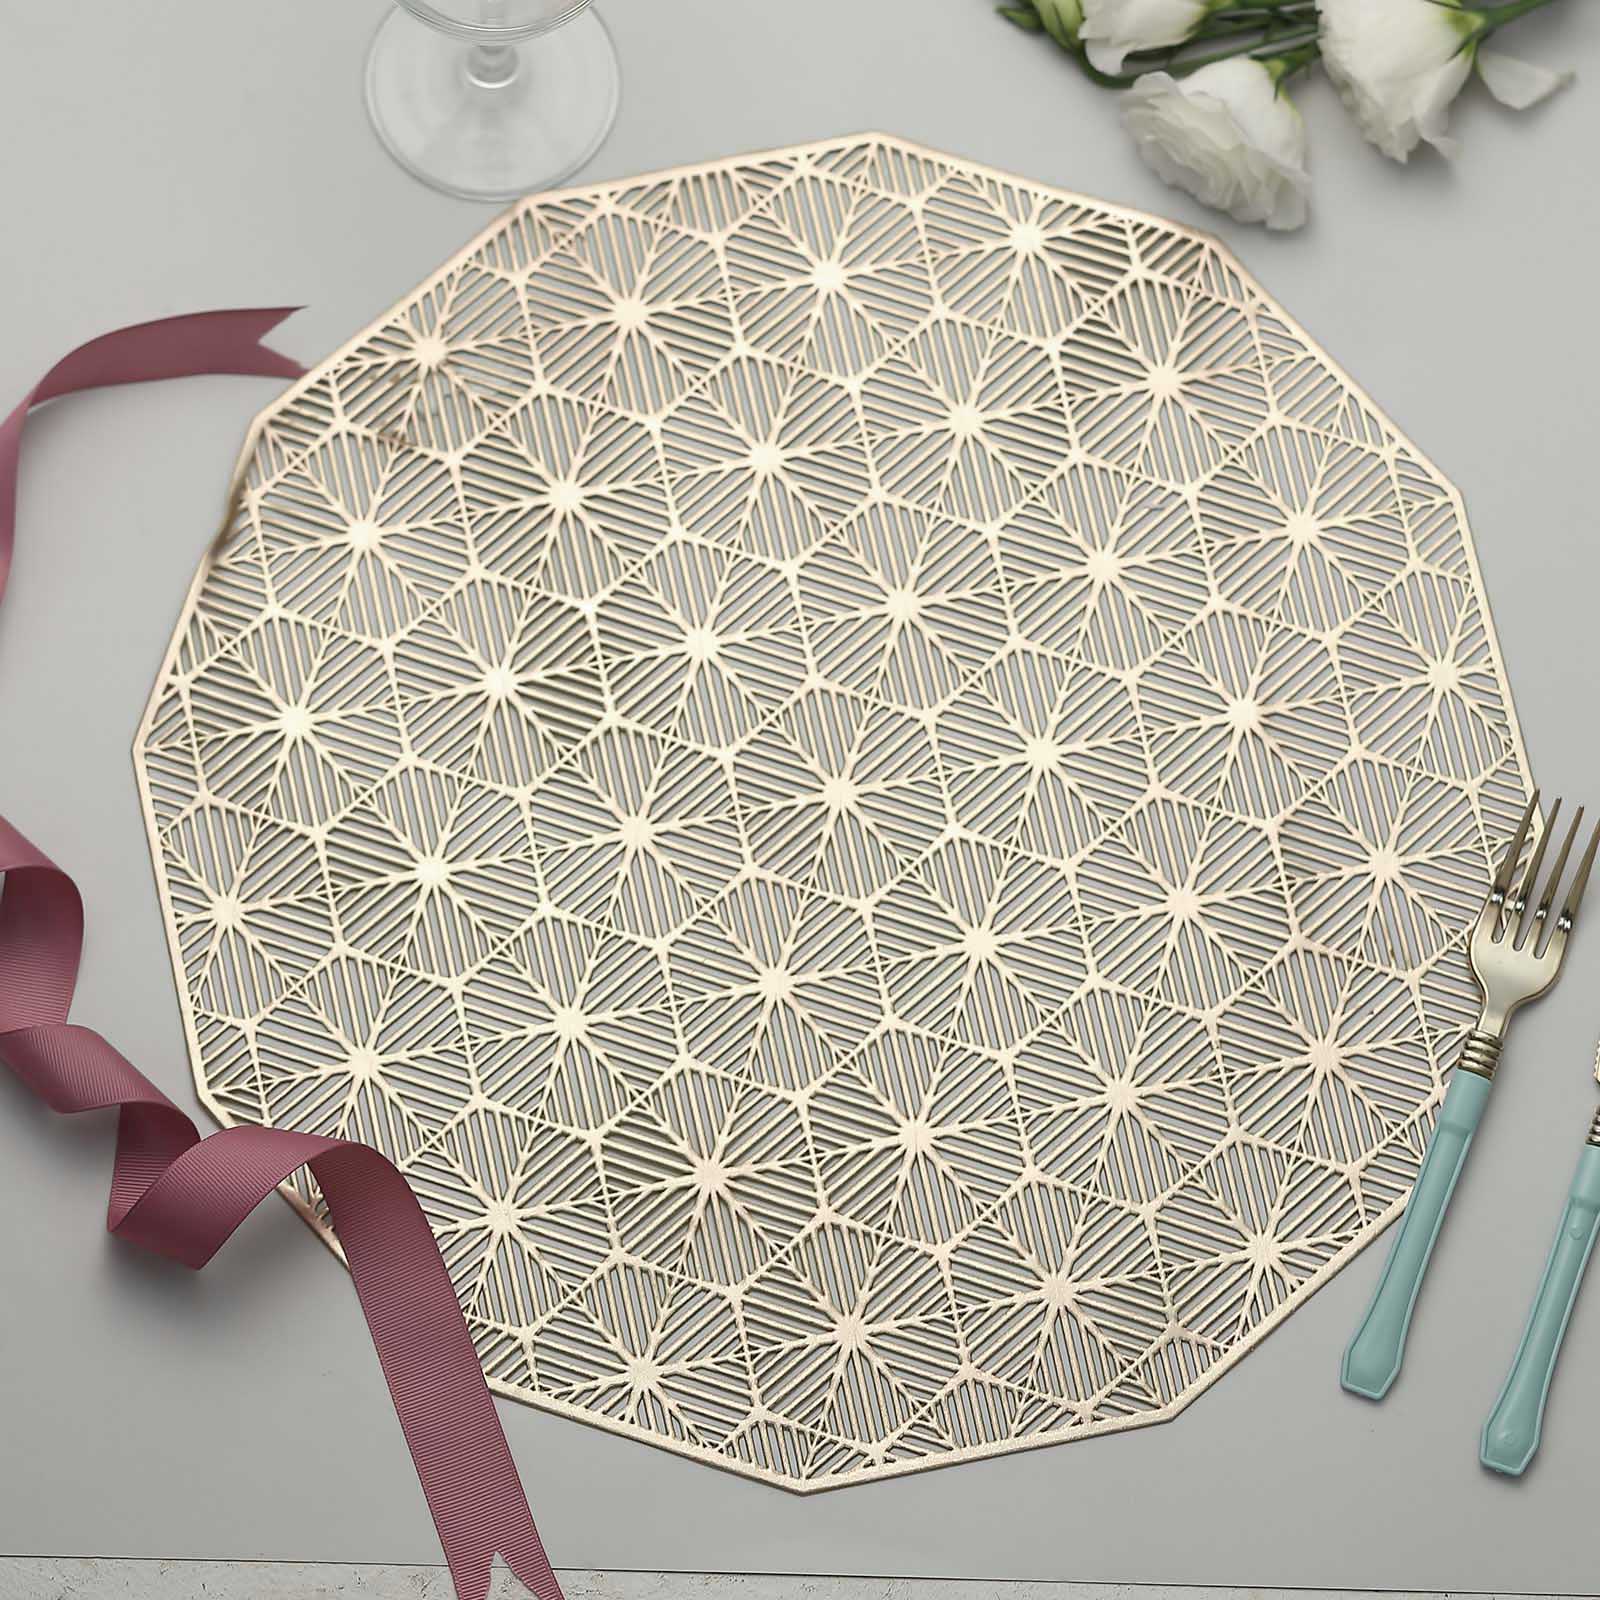 6 Pack 15 Rose Gold Metallic Non-Slip Placemats, Wheat Design Round Vinyl Table Mats | by Tableclothsfactory